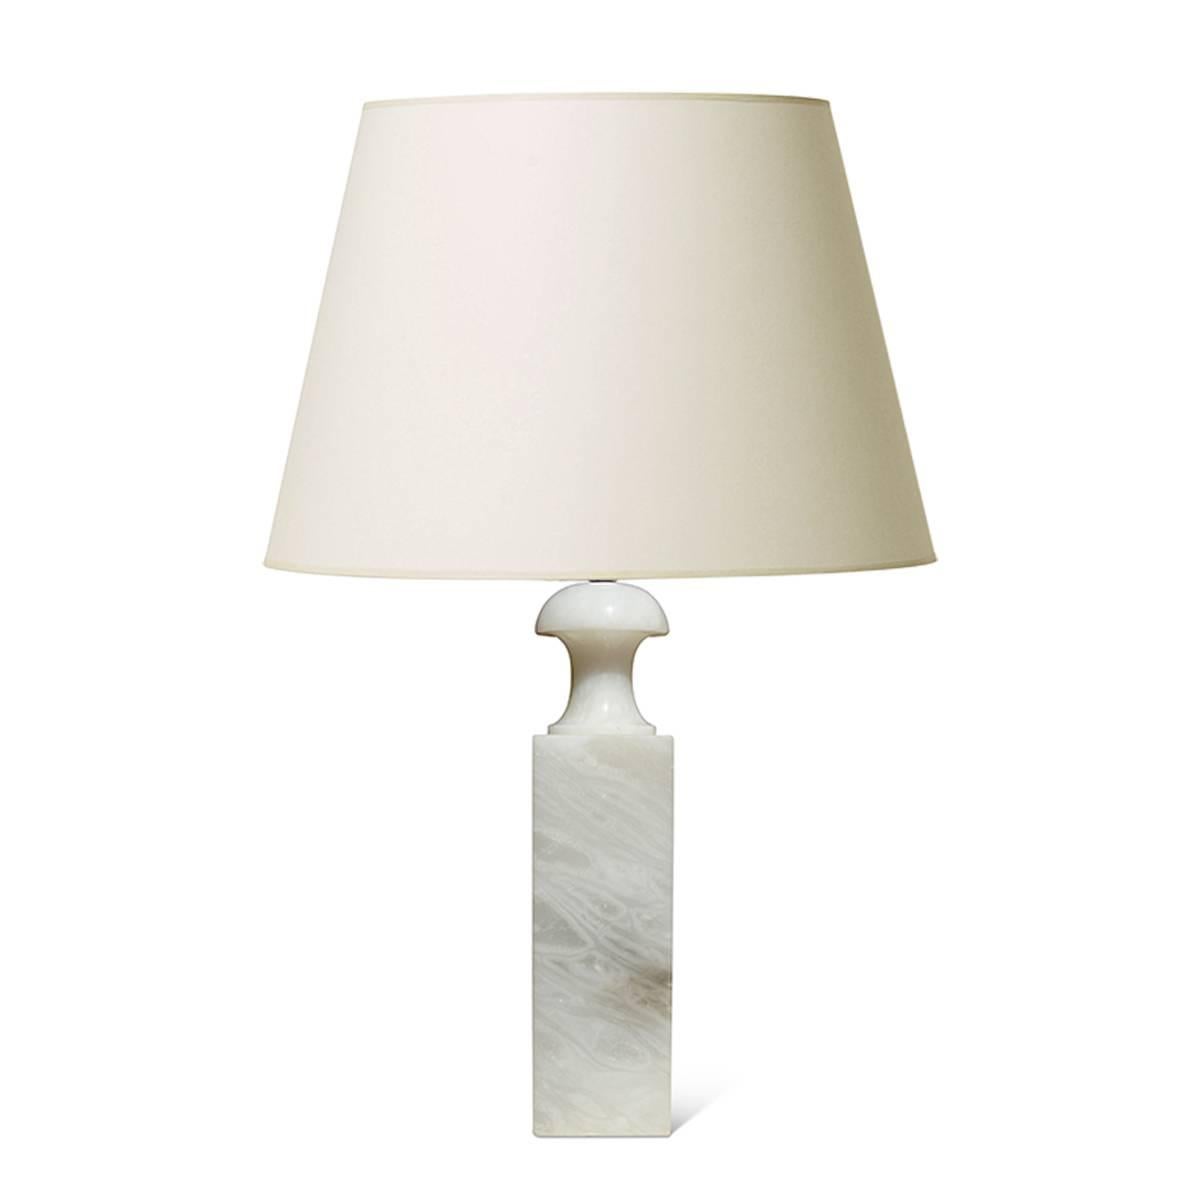 Scandinavian Modern Pair of Table Lamps with Tall Baluster Form in Alabaster by Bergboms For Sale